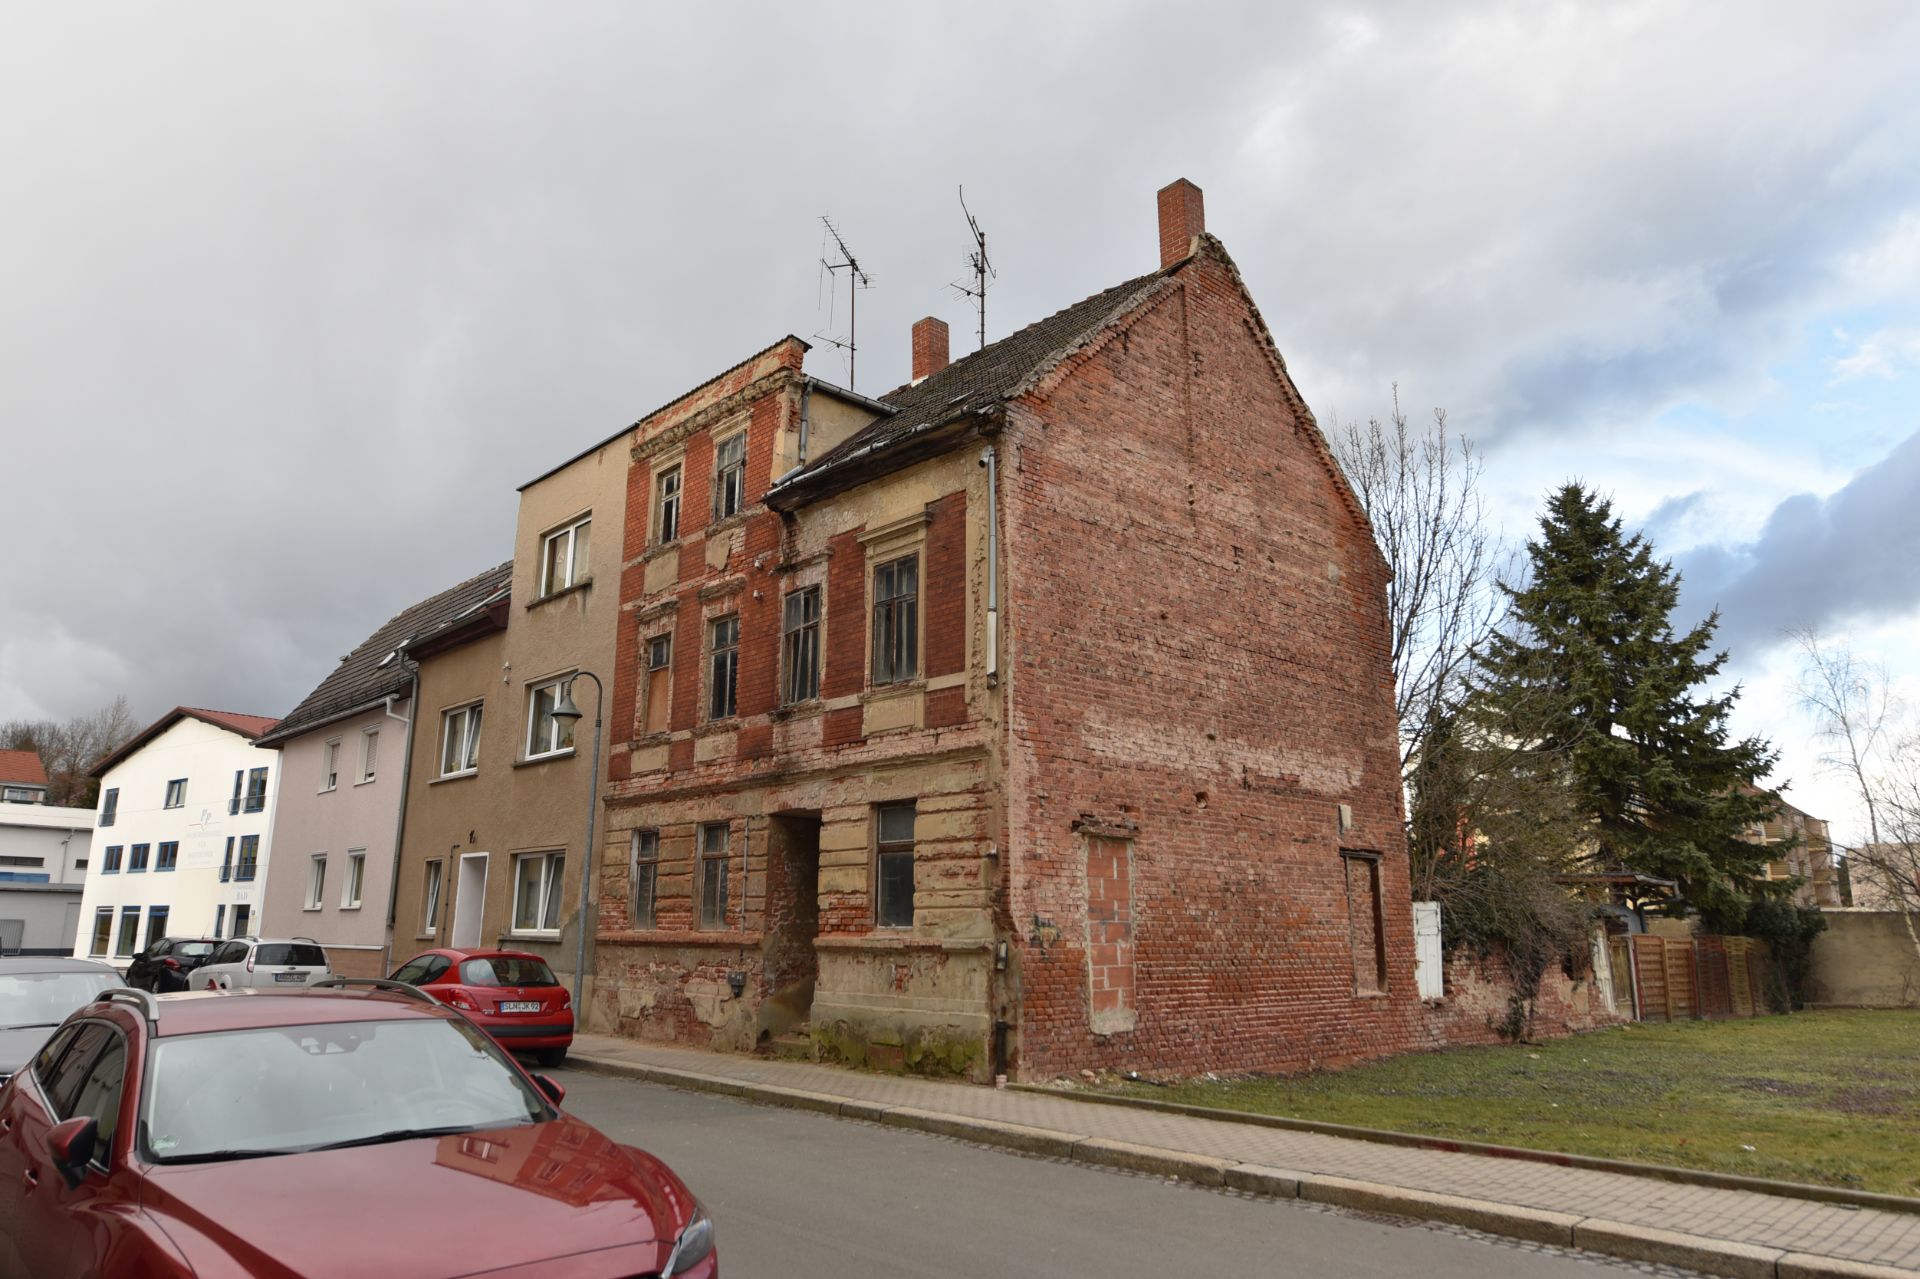 LARGE HOUSE IN SCHMÖLLN, GERMANY - Image 6 of 15